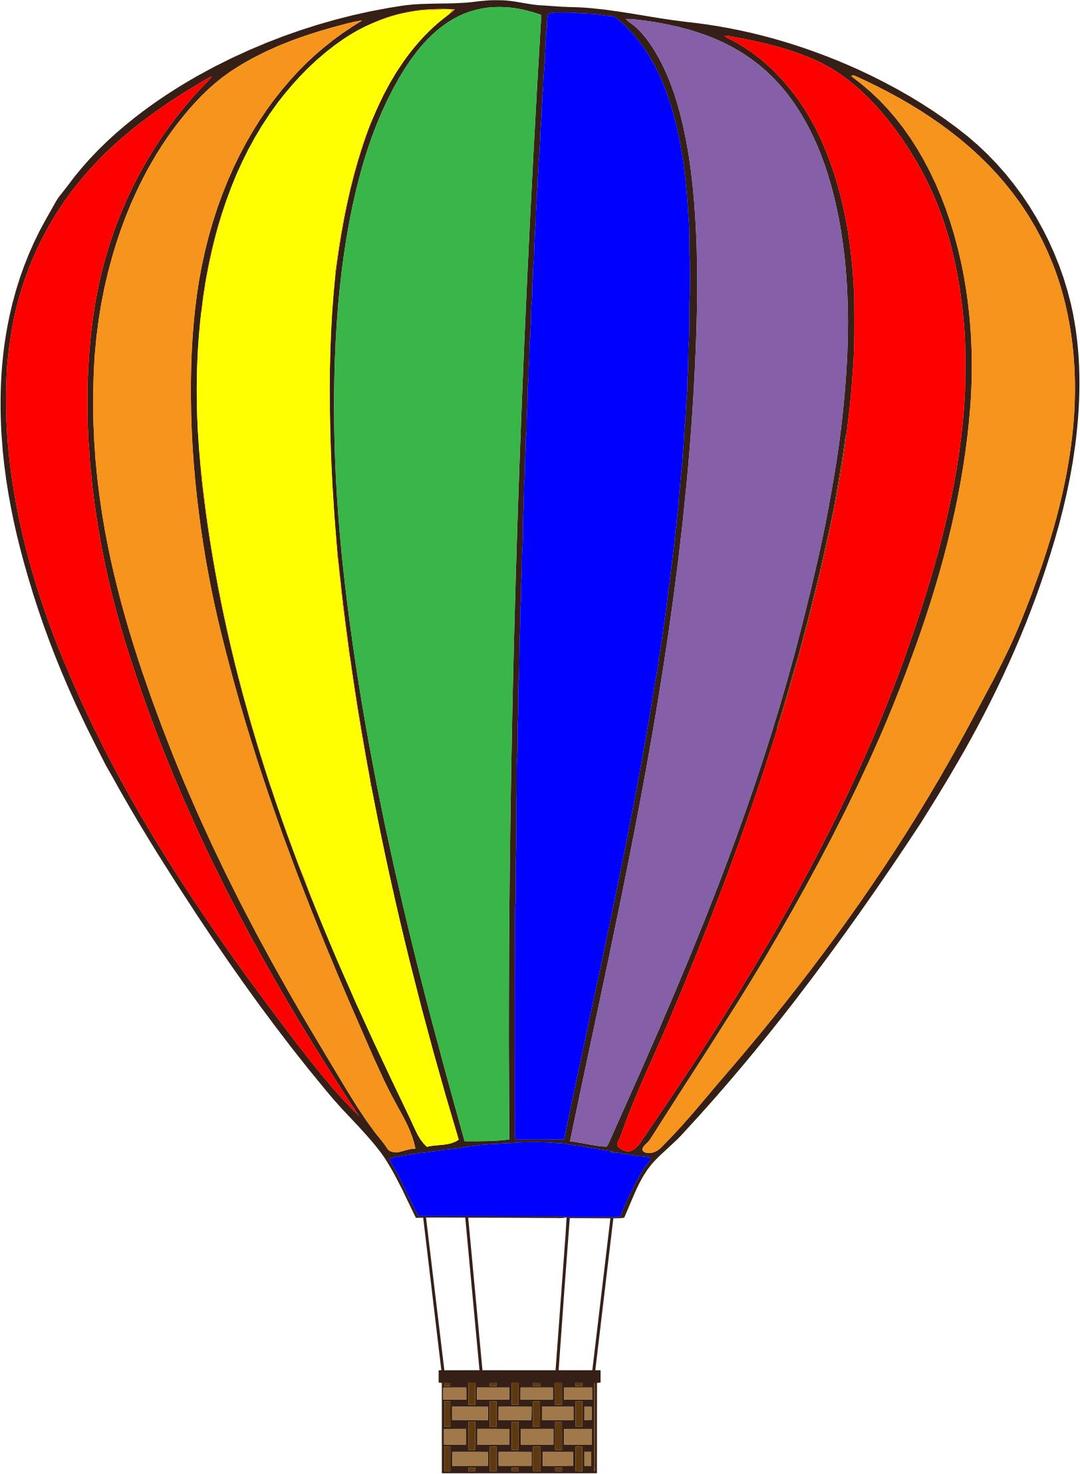 Colorful Hot Air Balloon png transparent